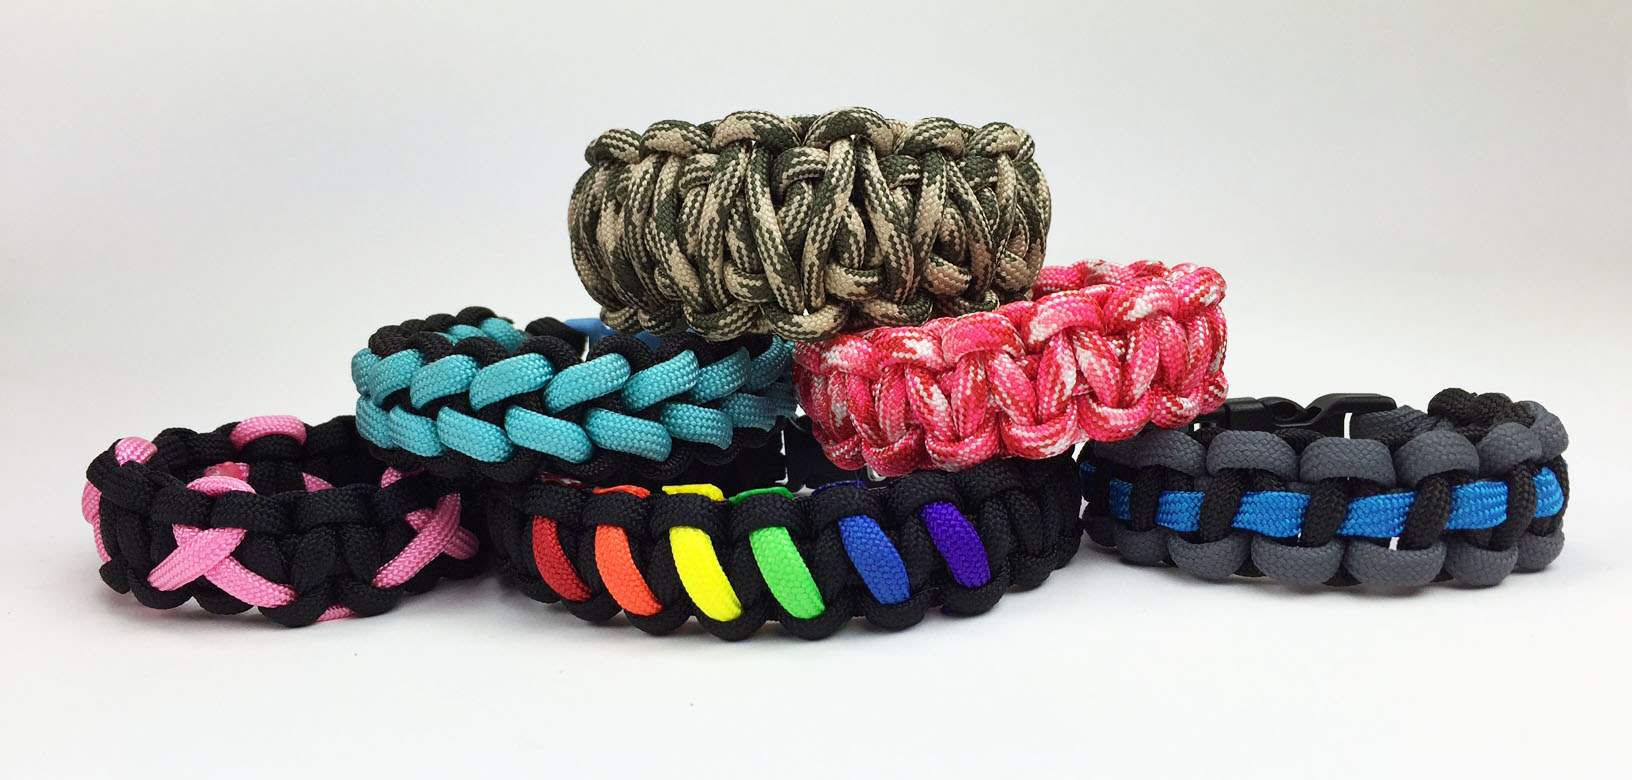 Paracord Bracelet - Cobra Stitched with Micro Cord  Paracord bracelets,  Paracord bracelet patterns, Paracord weaves